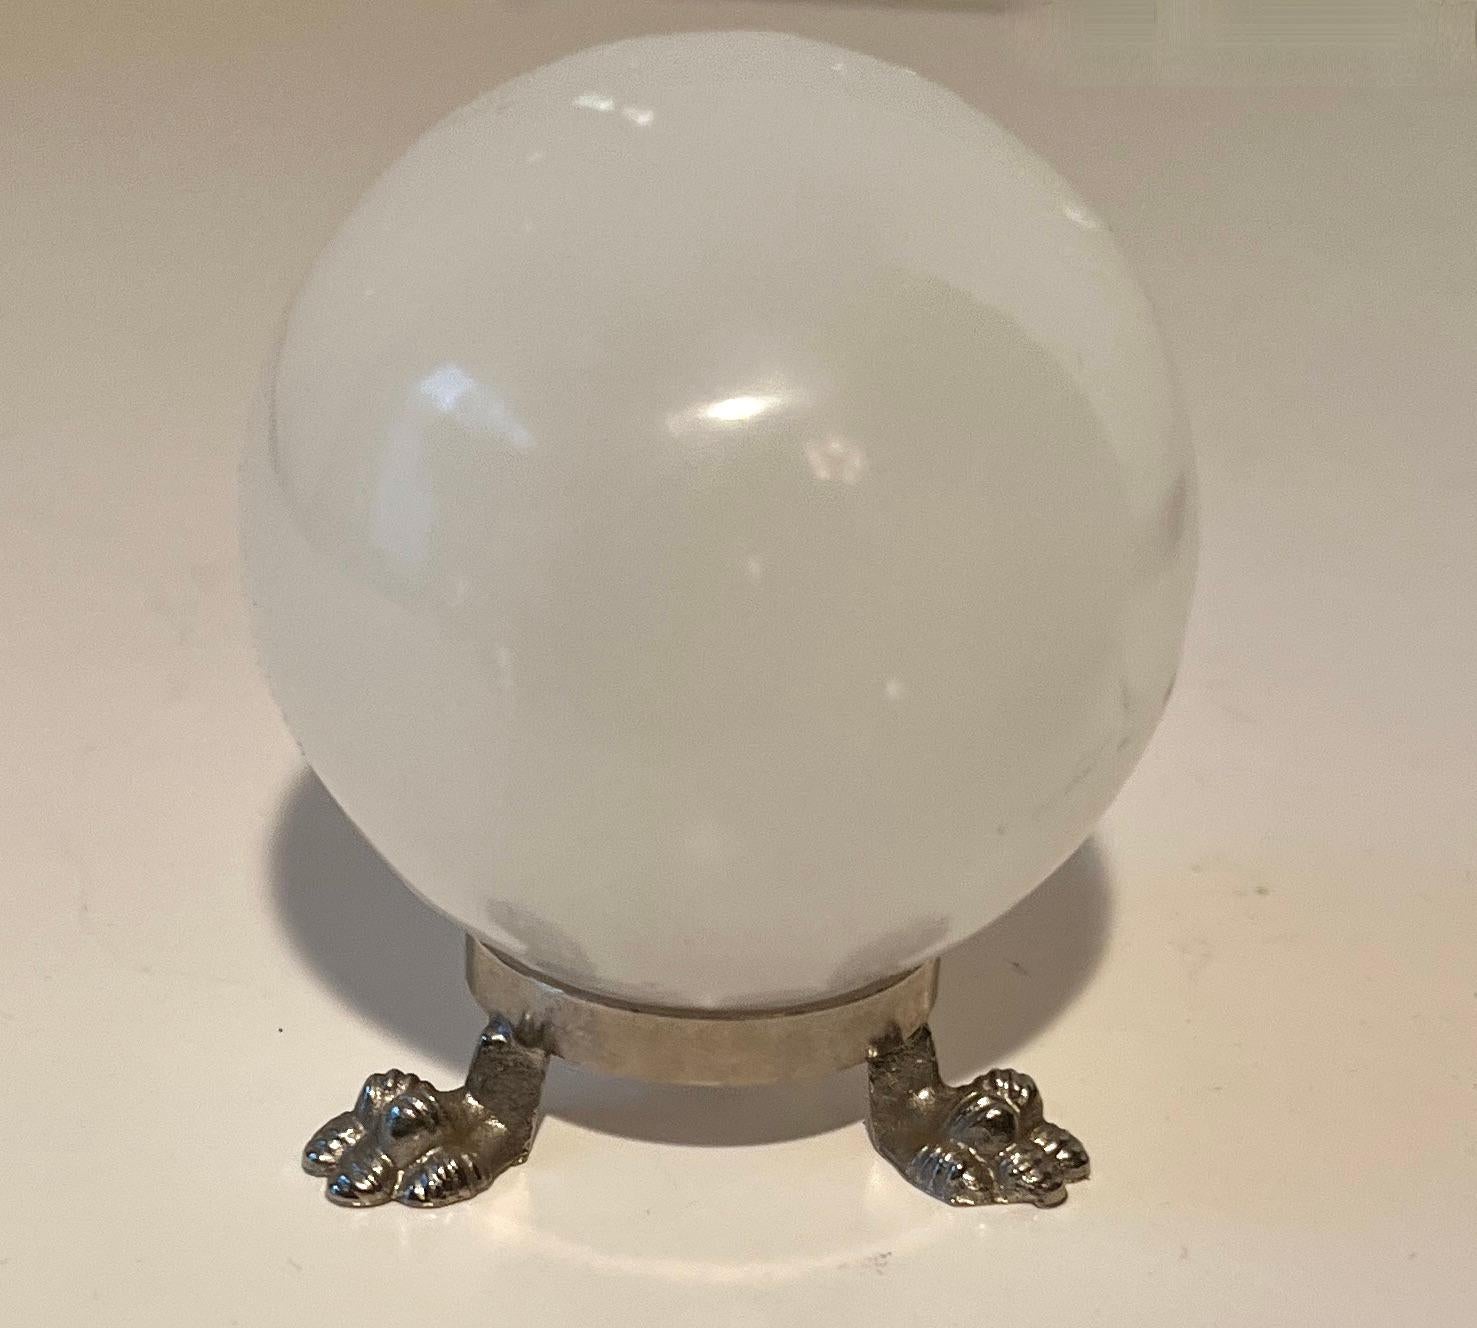 A lovely, small White Quartz Tigers eye Ball on top of a Silver Stand with paw feet.

The paperweight is a great decorative piece and on a very nice little stand.  Could be used as a paperweight too!  

Small and a compliment to many areas or